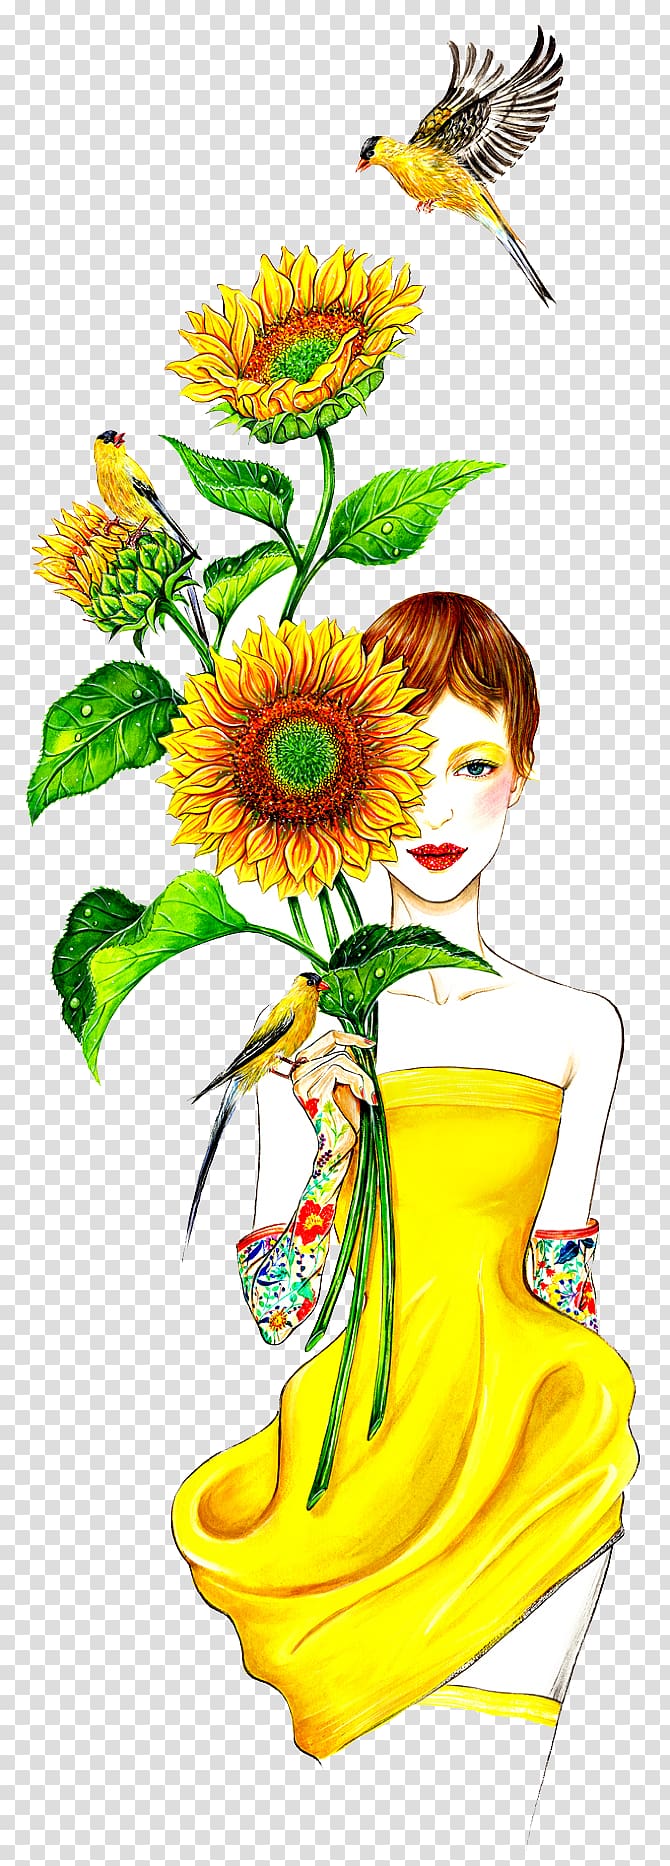 woman holding sunflowers illustration, Fashion illustration Drawing Illustrator Illustration, Sunflowers and birds transparent background PNG clipart